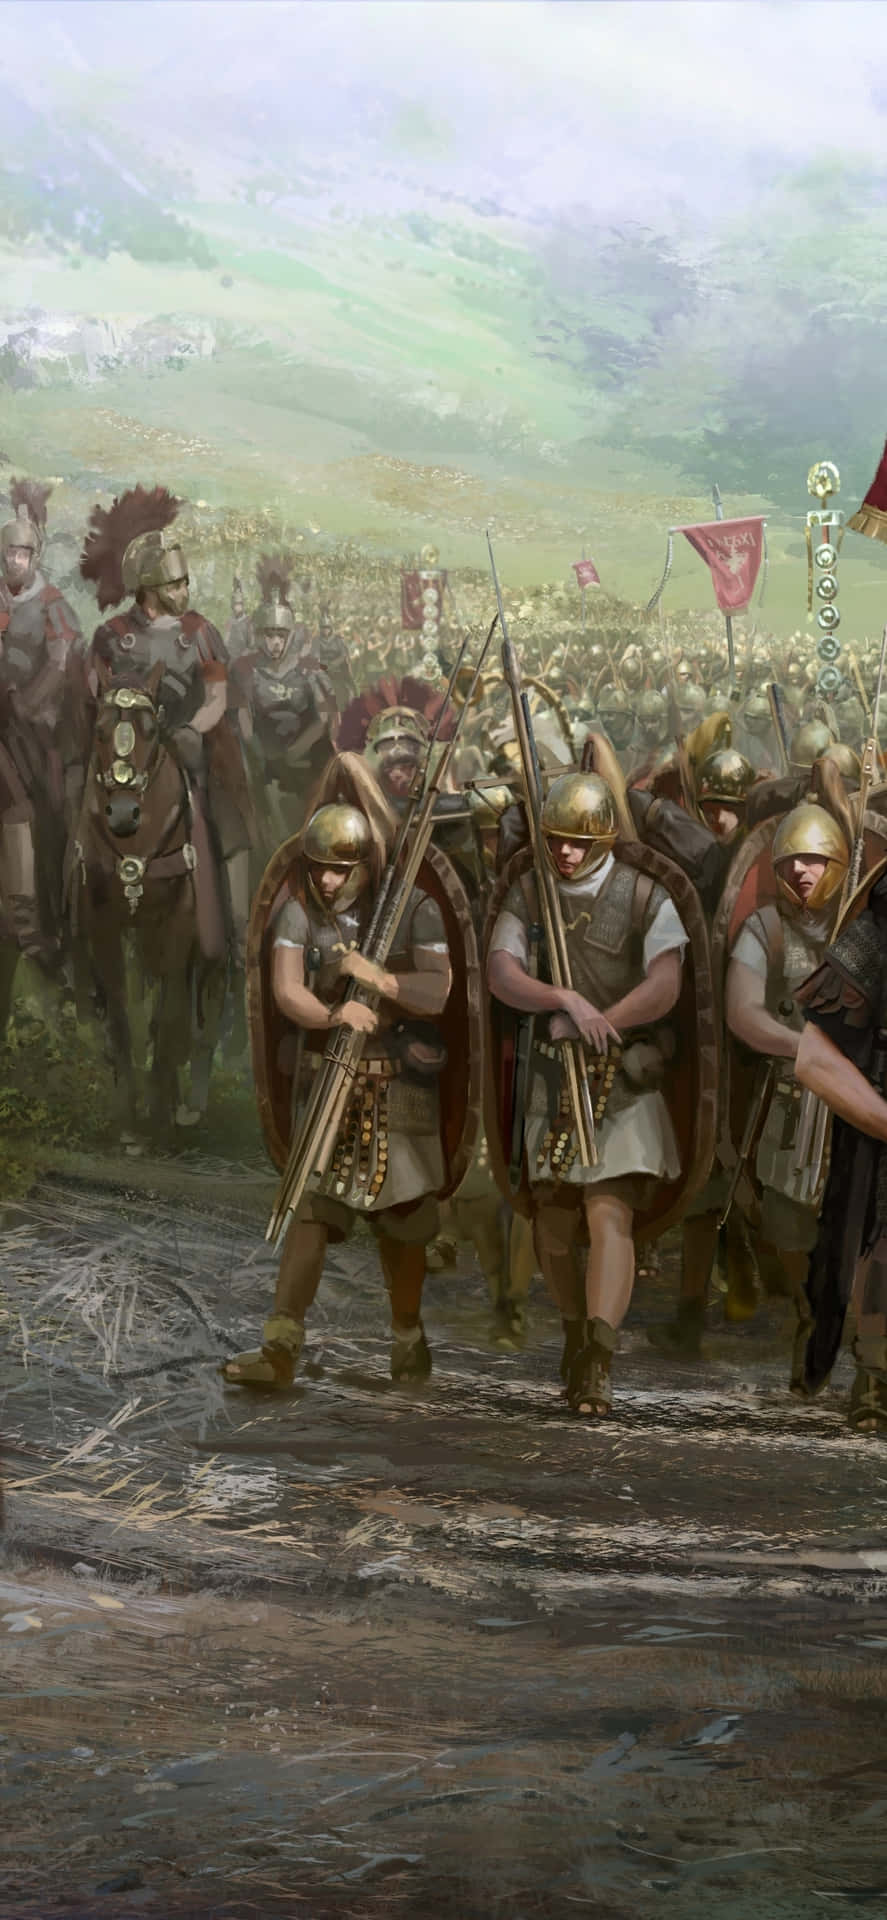 A Painting Of Roman Soldiers Marching Through A Field